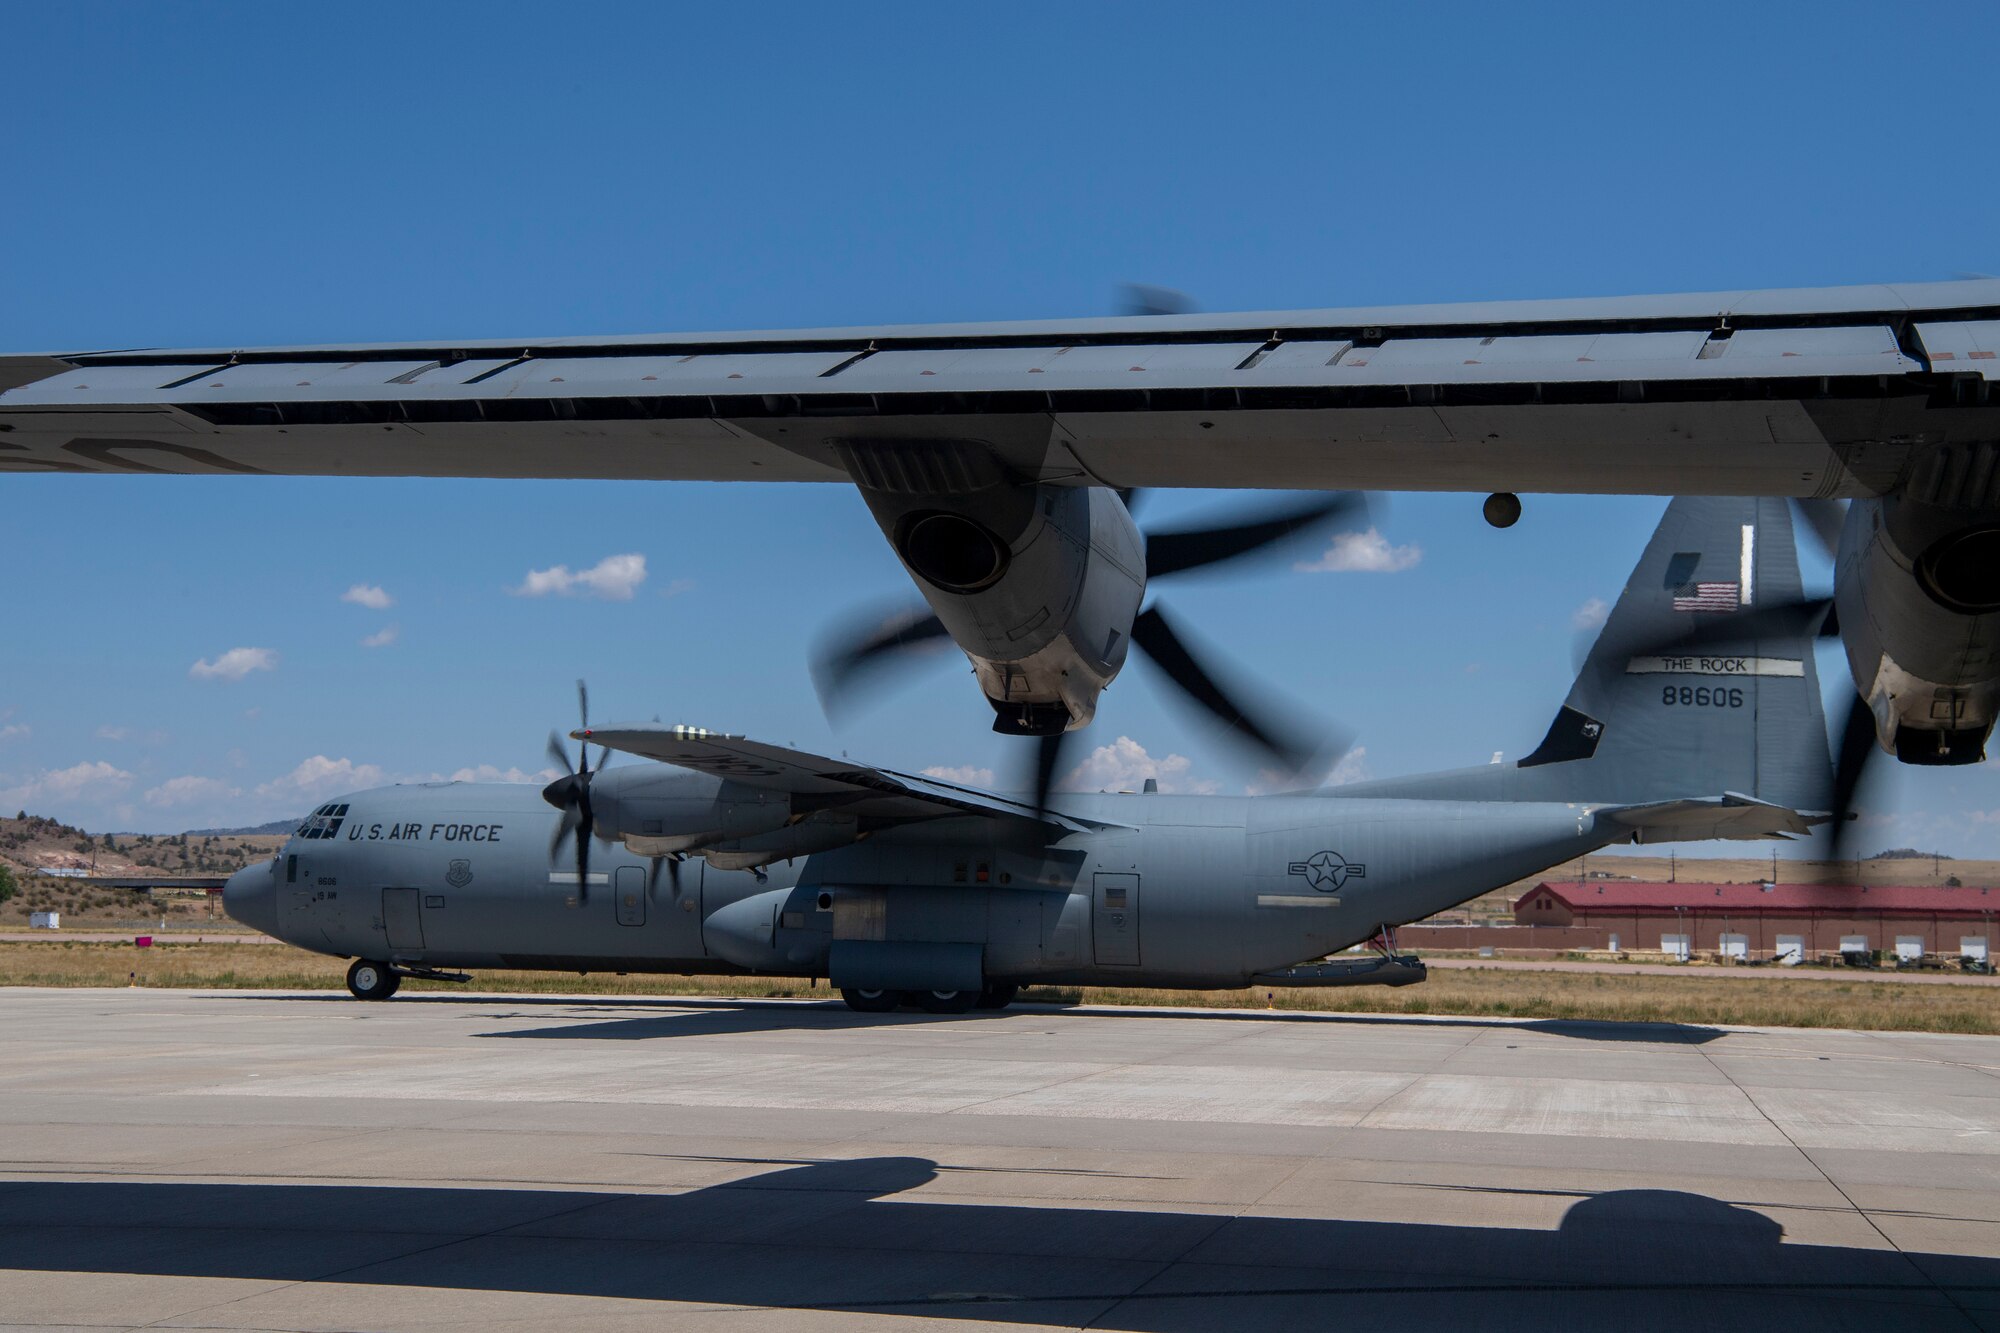 A C-130J Super Hercules assigned to the 41st Airlift Squadron taxis prior to takeoff during pre-deployment training at Montrose Regional Airport, Colorado, July 27, 2020. This training is part of the 4/12 deployment initiative, which was developed in 2019 between airlift squadrons from Dyess Air Force Base, Texas and Little Rock AFB, allowing each squadron a full year of dwell time followed by a four-month rotation to their respective area of responsibility. (U.S. Air Force photo by Airman 1st Class Aaron Irvin)